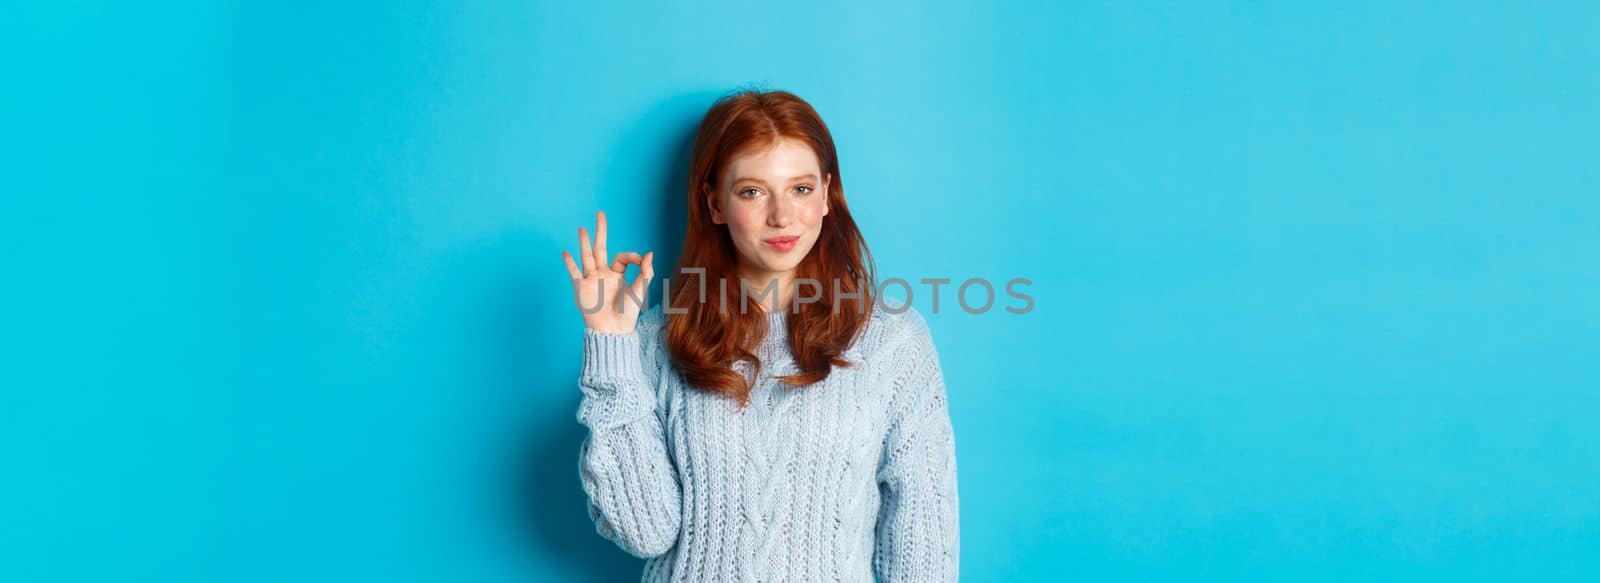 Confident redhead girl assuring you, showing okay sign and smiling, saying yes, approve and agree, standing over blue background.